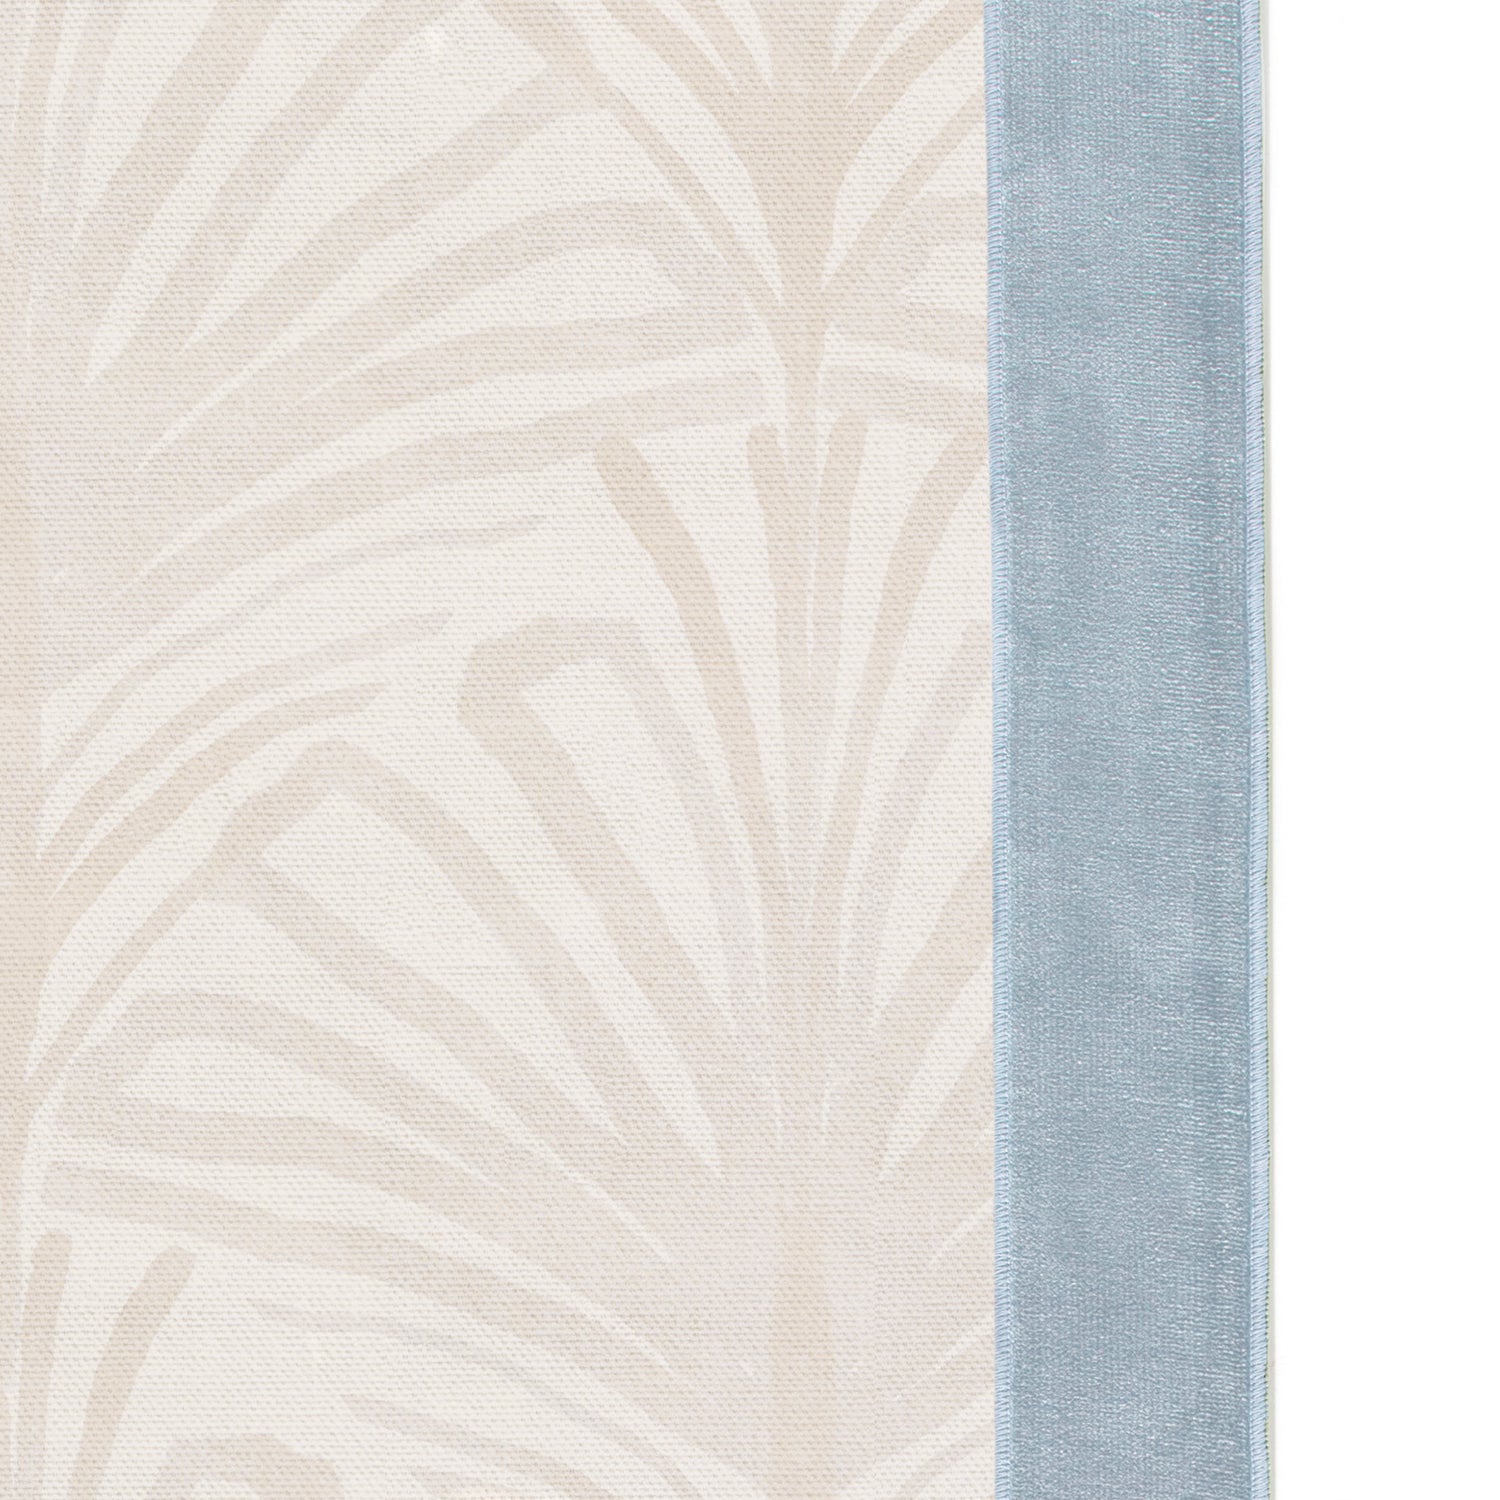 Upclose picture of Suzy Sand custom Beige Palmshower curtain with sky velvet band trim